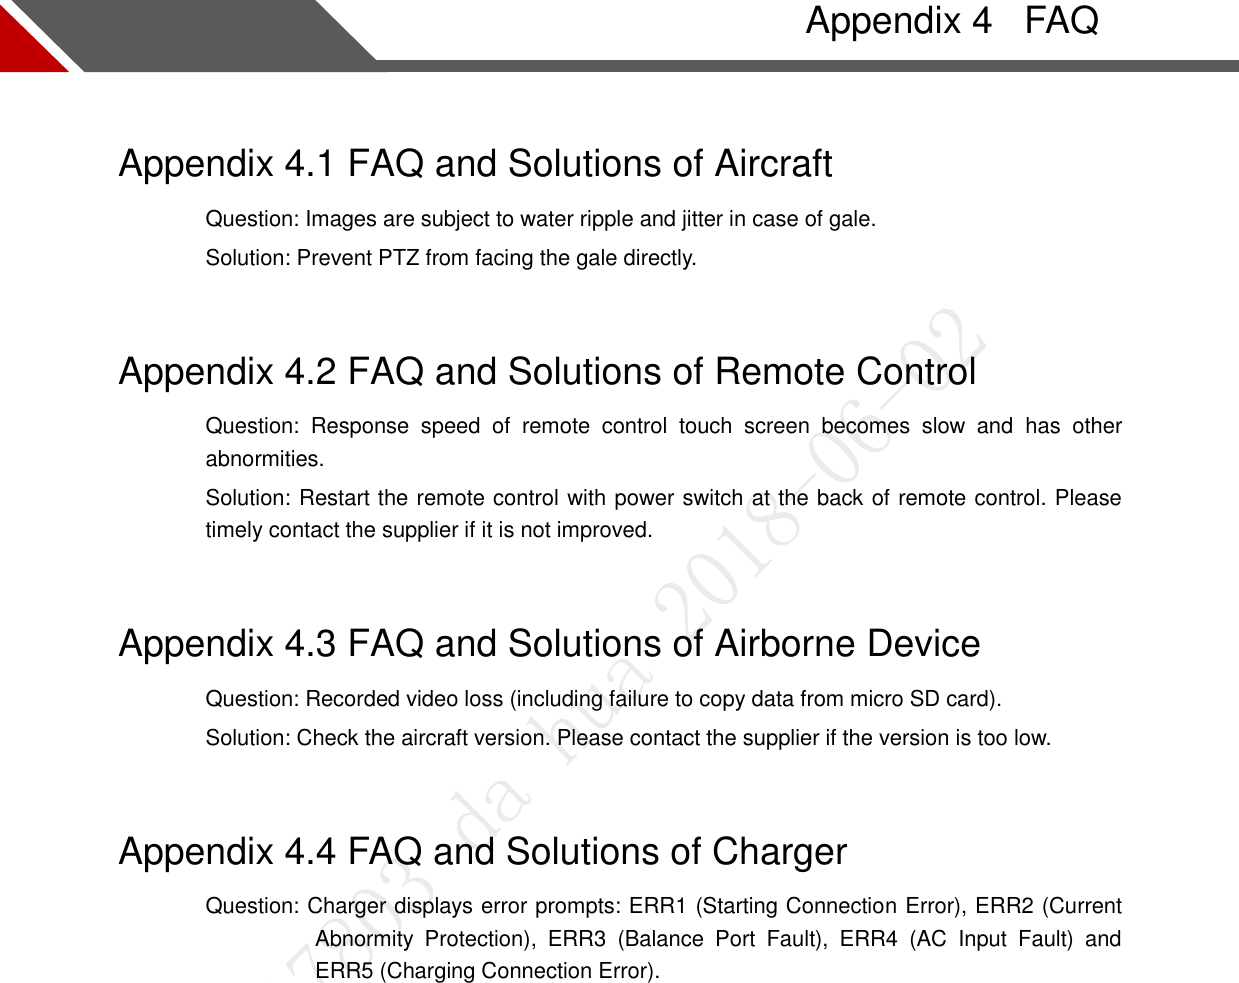     FAQ Appendix 4Appendix 4.1 FAQ and Solutions of Aircraft Question: Images are subject to water ripple and jitter in case of gale.   Solution: Prevent PTZ from facing the gale directly. Appendix 4.2 FAQ and Solutions of Remote Control Question:  Response  speed  of  remote  control  touch  screen  becomes  slow  and  has  other abnormities. Solution: Restart the remote control with power switch at the back of remote control. Please timely contact the supplier if it is not improved. Appendix 4.3 FAQ and Solutions of Airborne Device Question: Recorded video loss (including failure to copy data from micro SD card). Solution: Check the aircraft version. Please contact the supplier if the version is too low. Appendix 4.4 FAQ and Solutions of Charger Question: Charger displays error prompts: ERR1 (Starting Connection Error), ERR2 (Current Abnormity  Protection),  ERR3  (Balance  Port  Fault),  ERR4  (AC  Input  Fault)  and ERR5 (Charging Connection Error).  